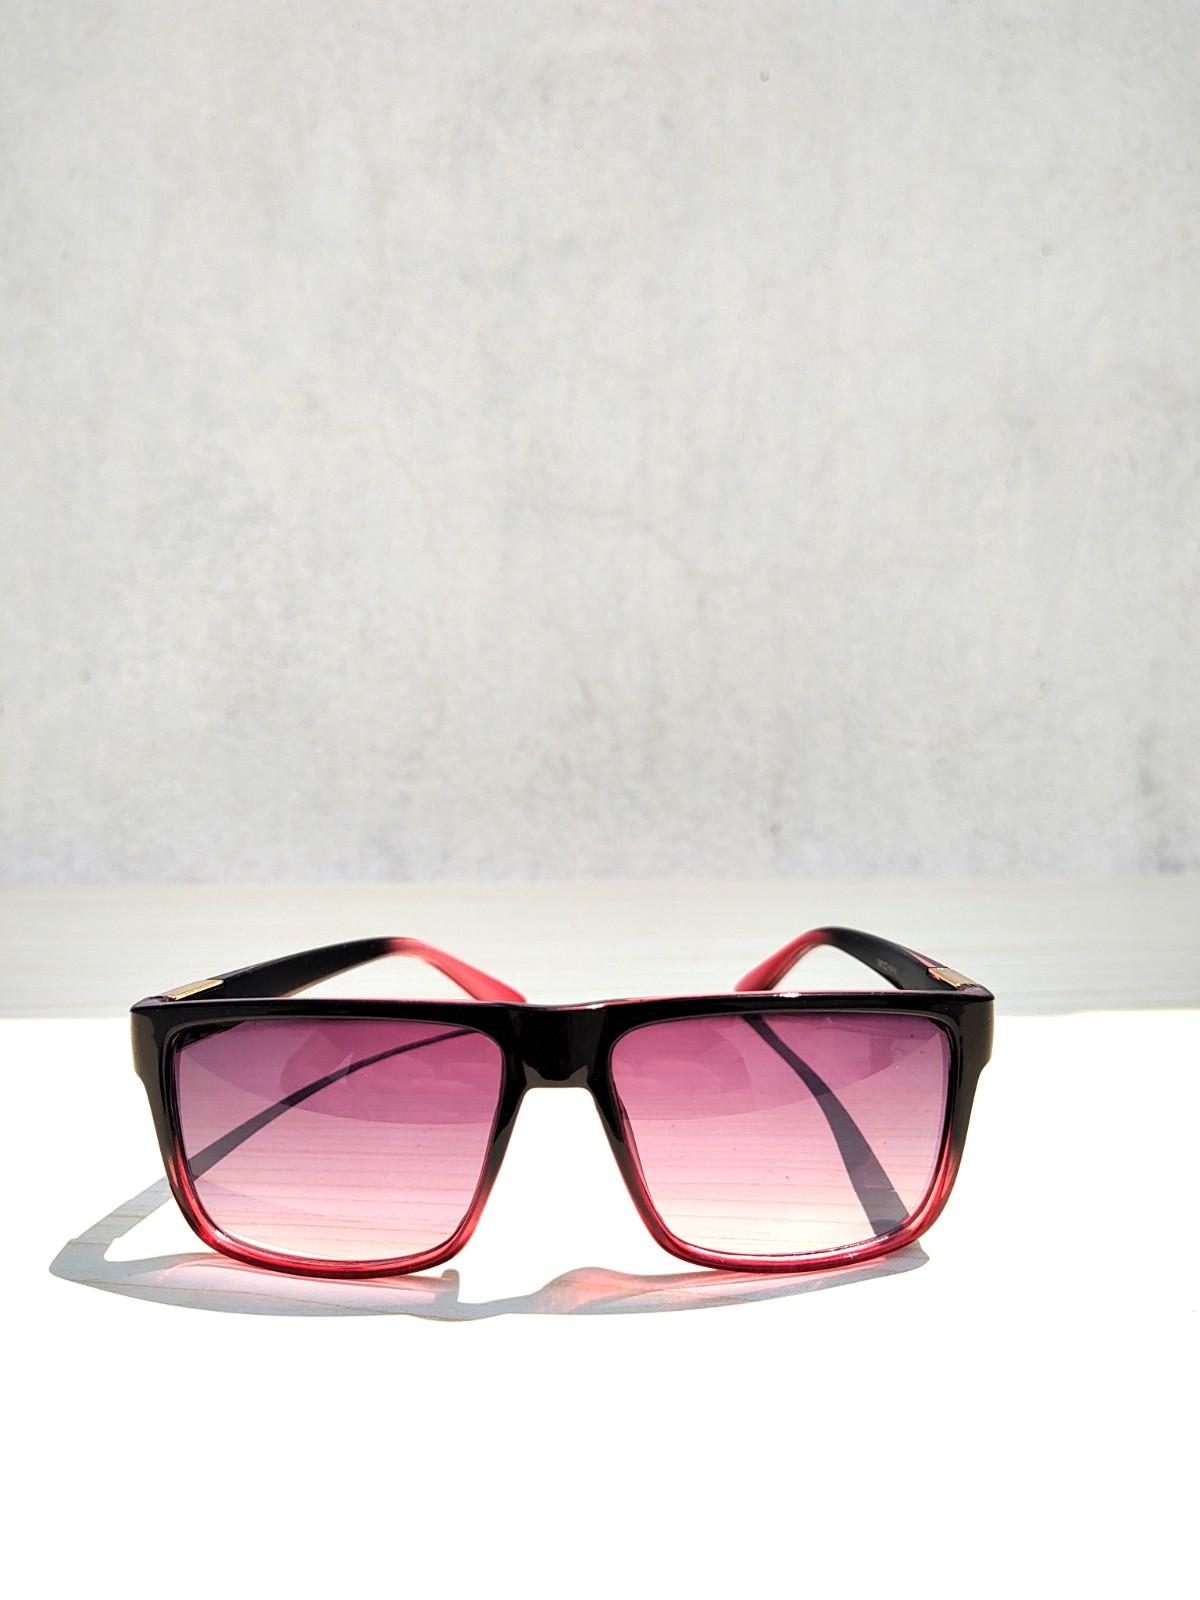 UV protected red and black sunglass for men and women